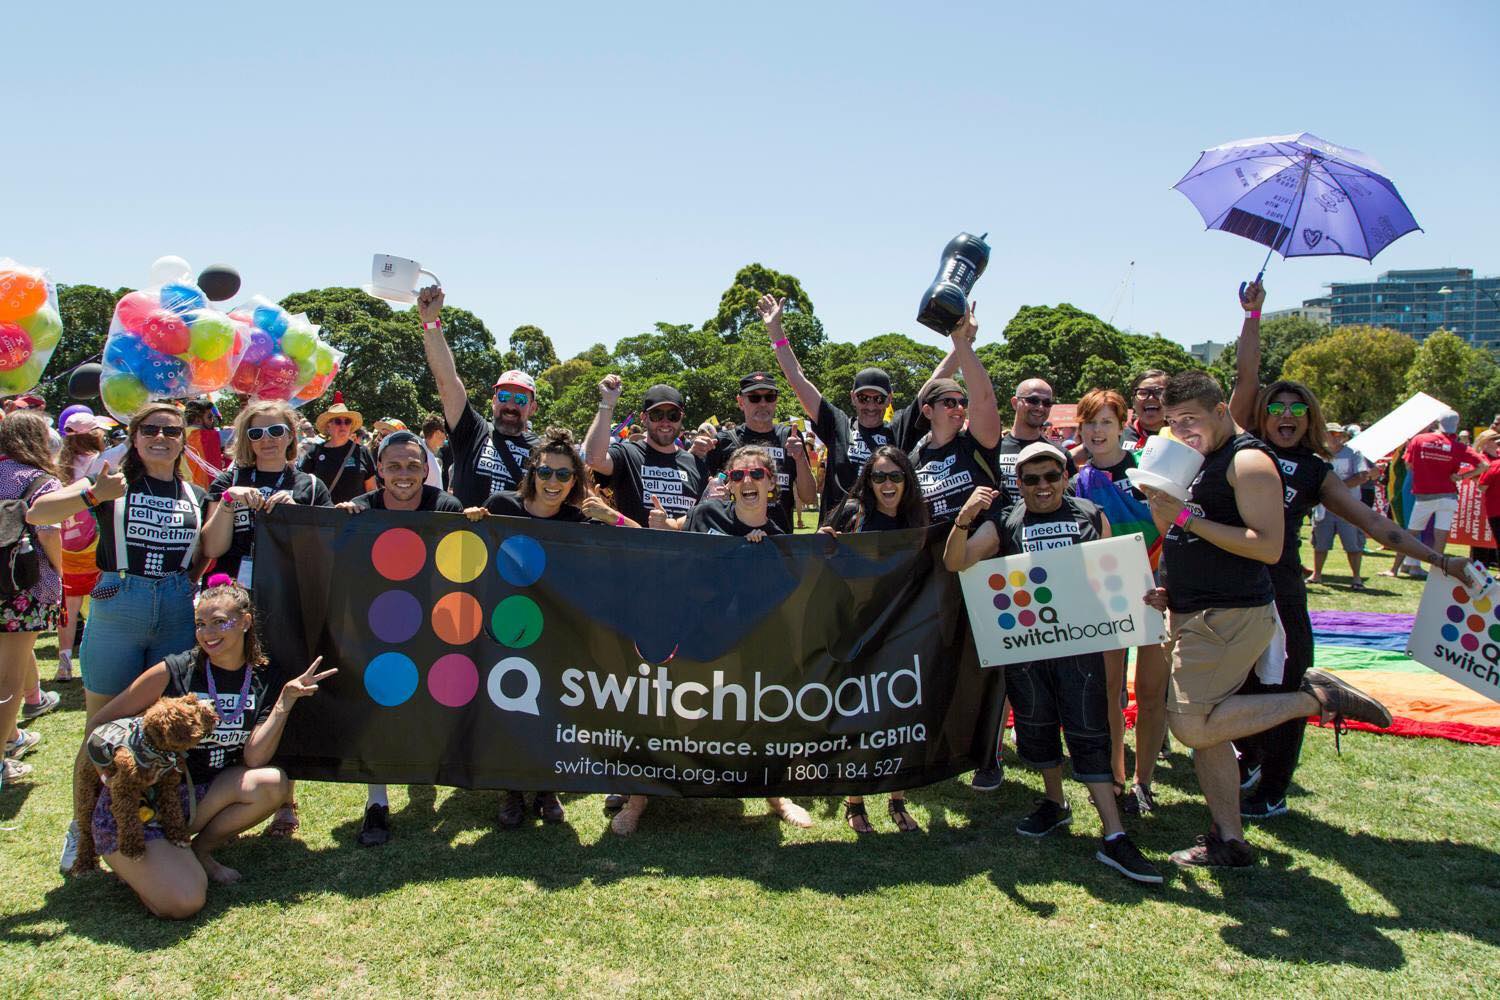 The Switchboard team